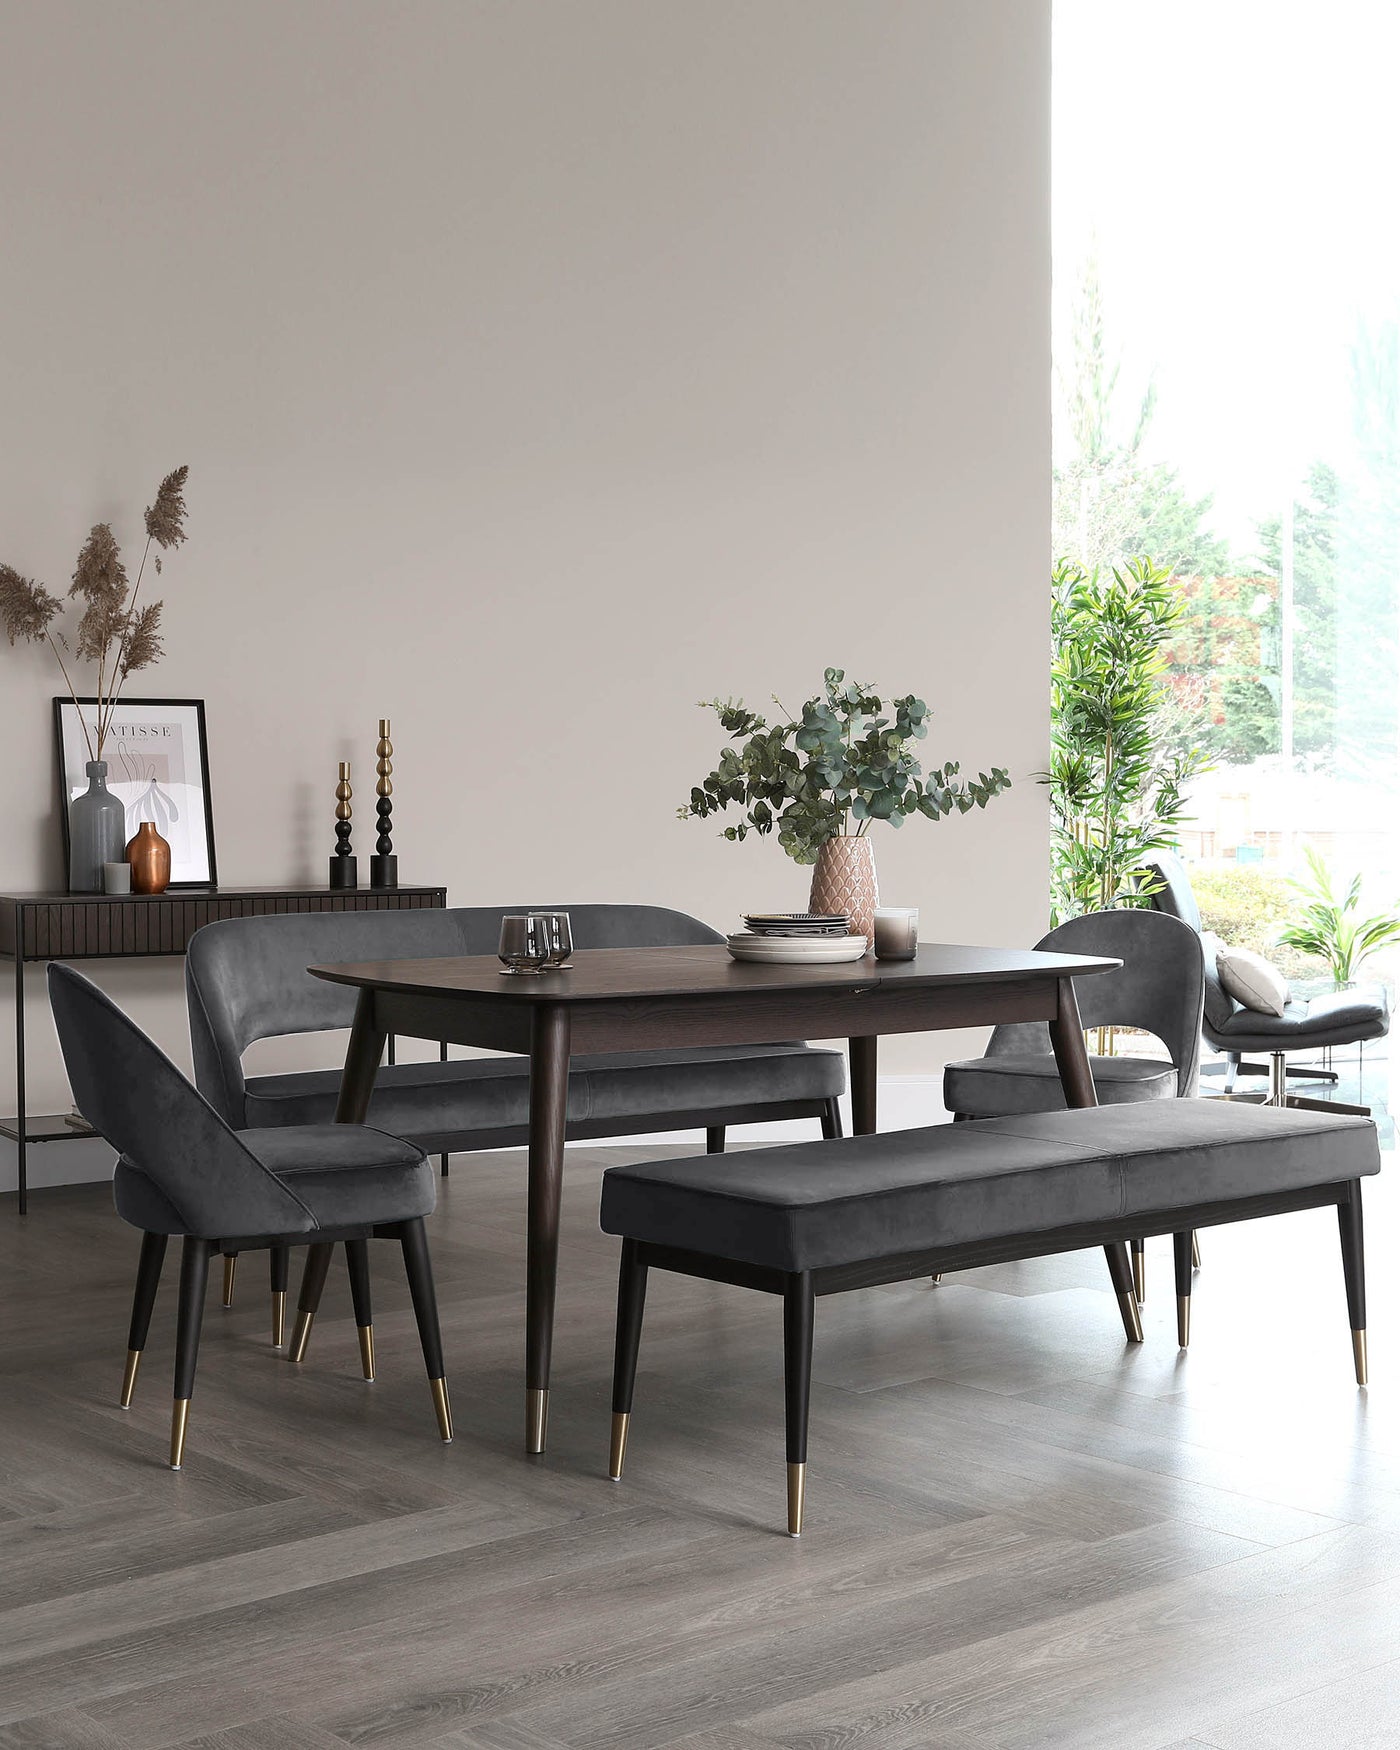 Elegant dark wood dining table complemented by a matching bench and three plush velvet chairs with brass tipped legs.